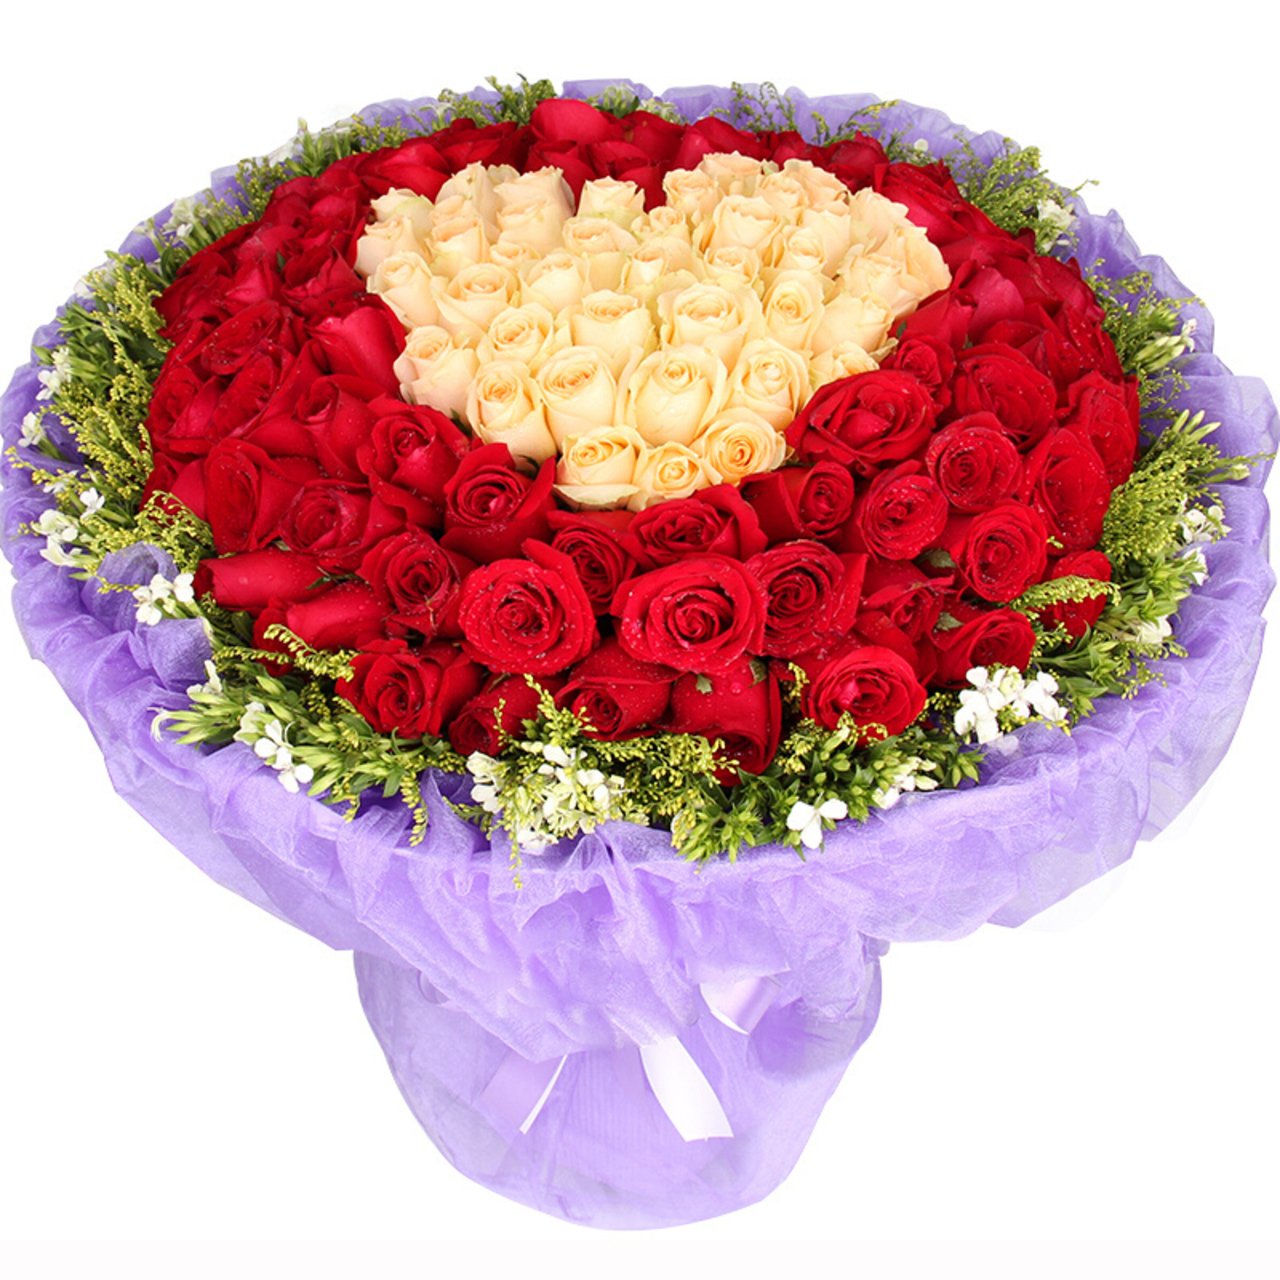 When i miss you(
A mix of 99 red roses and champagne roses)